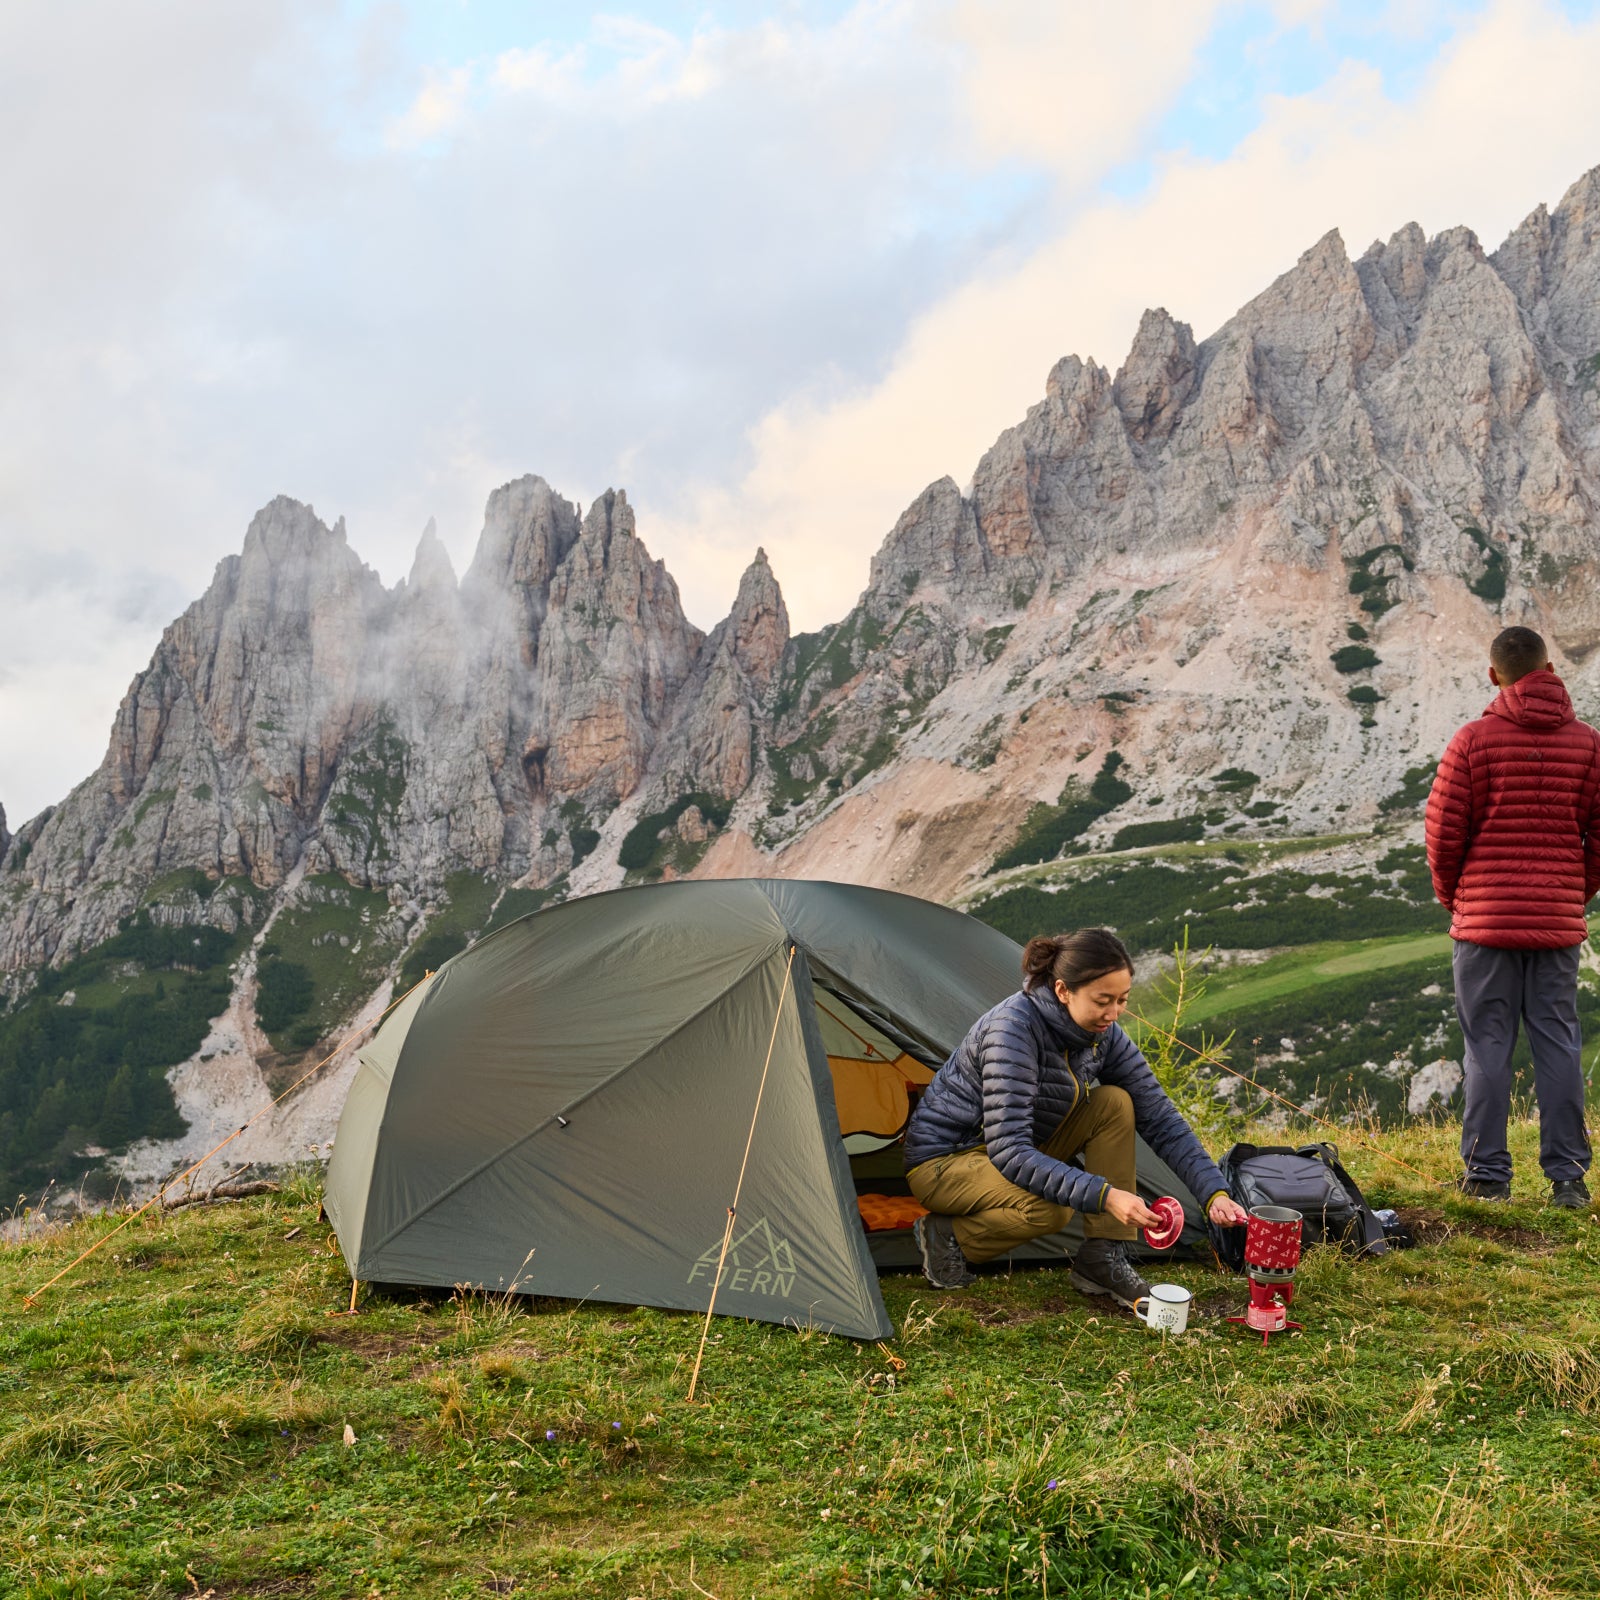 Fjern Gökotta tent pitched on a grassy plateau in the Dolomites overlooking a vast rocky ridgeline